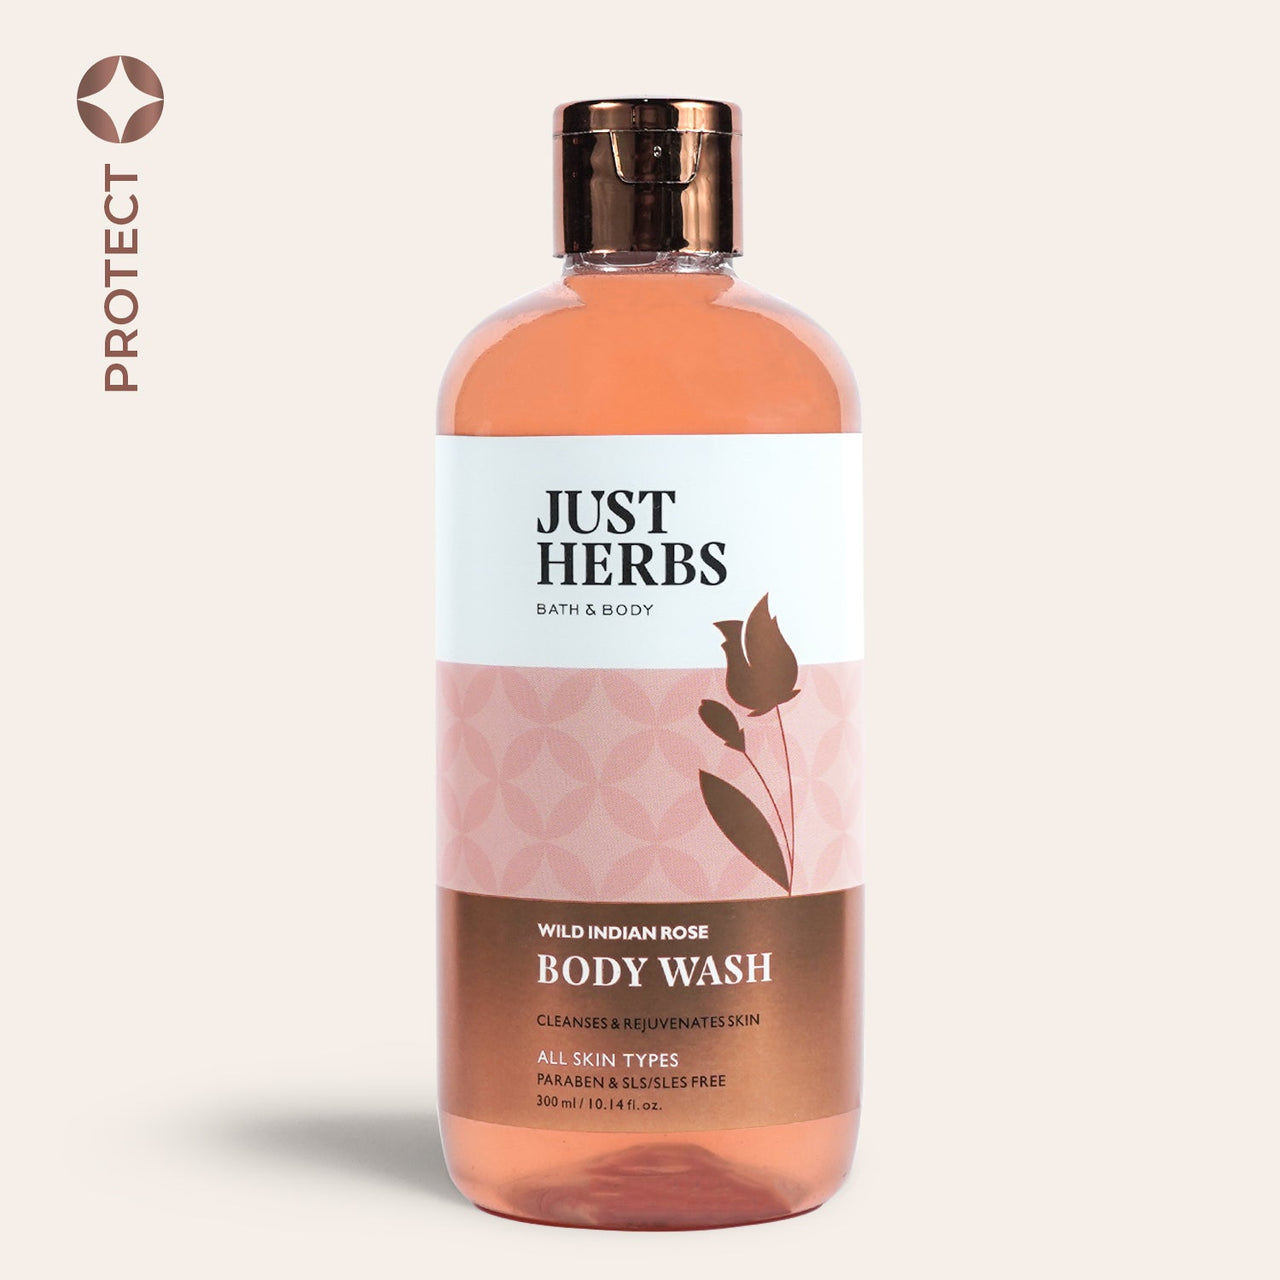 Wild Indian Rose Body Wash - Just Herbs